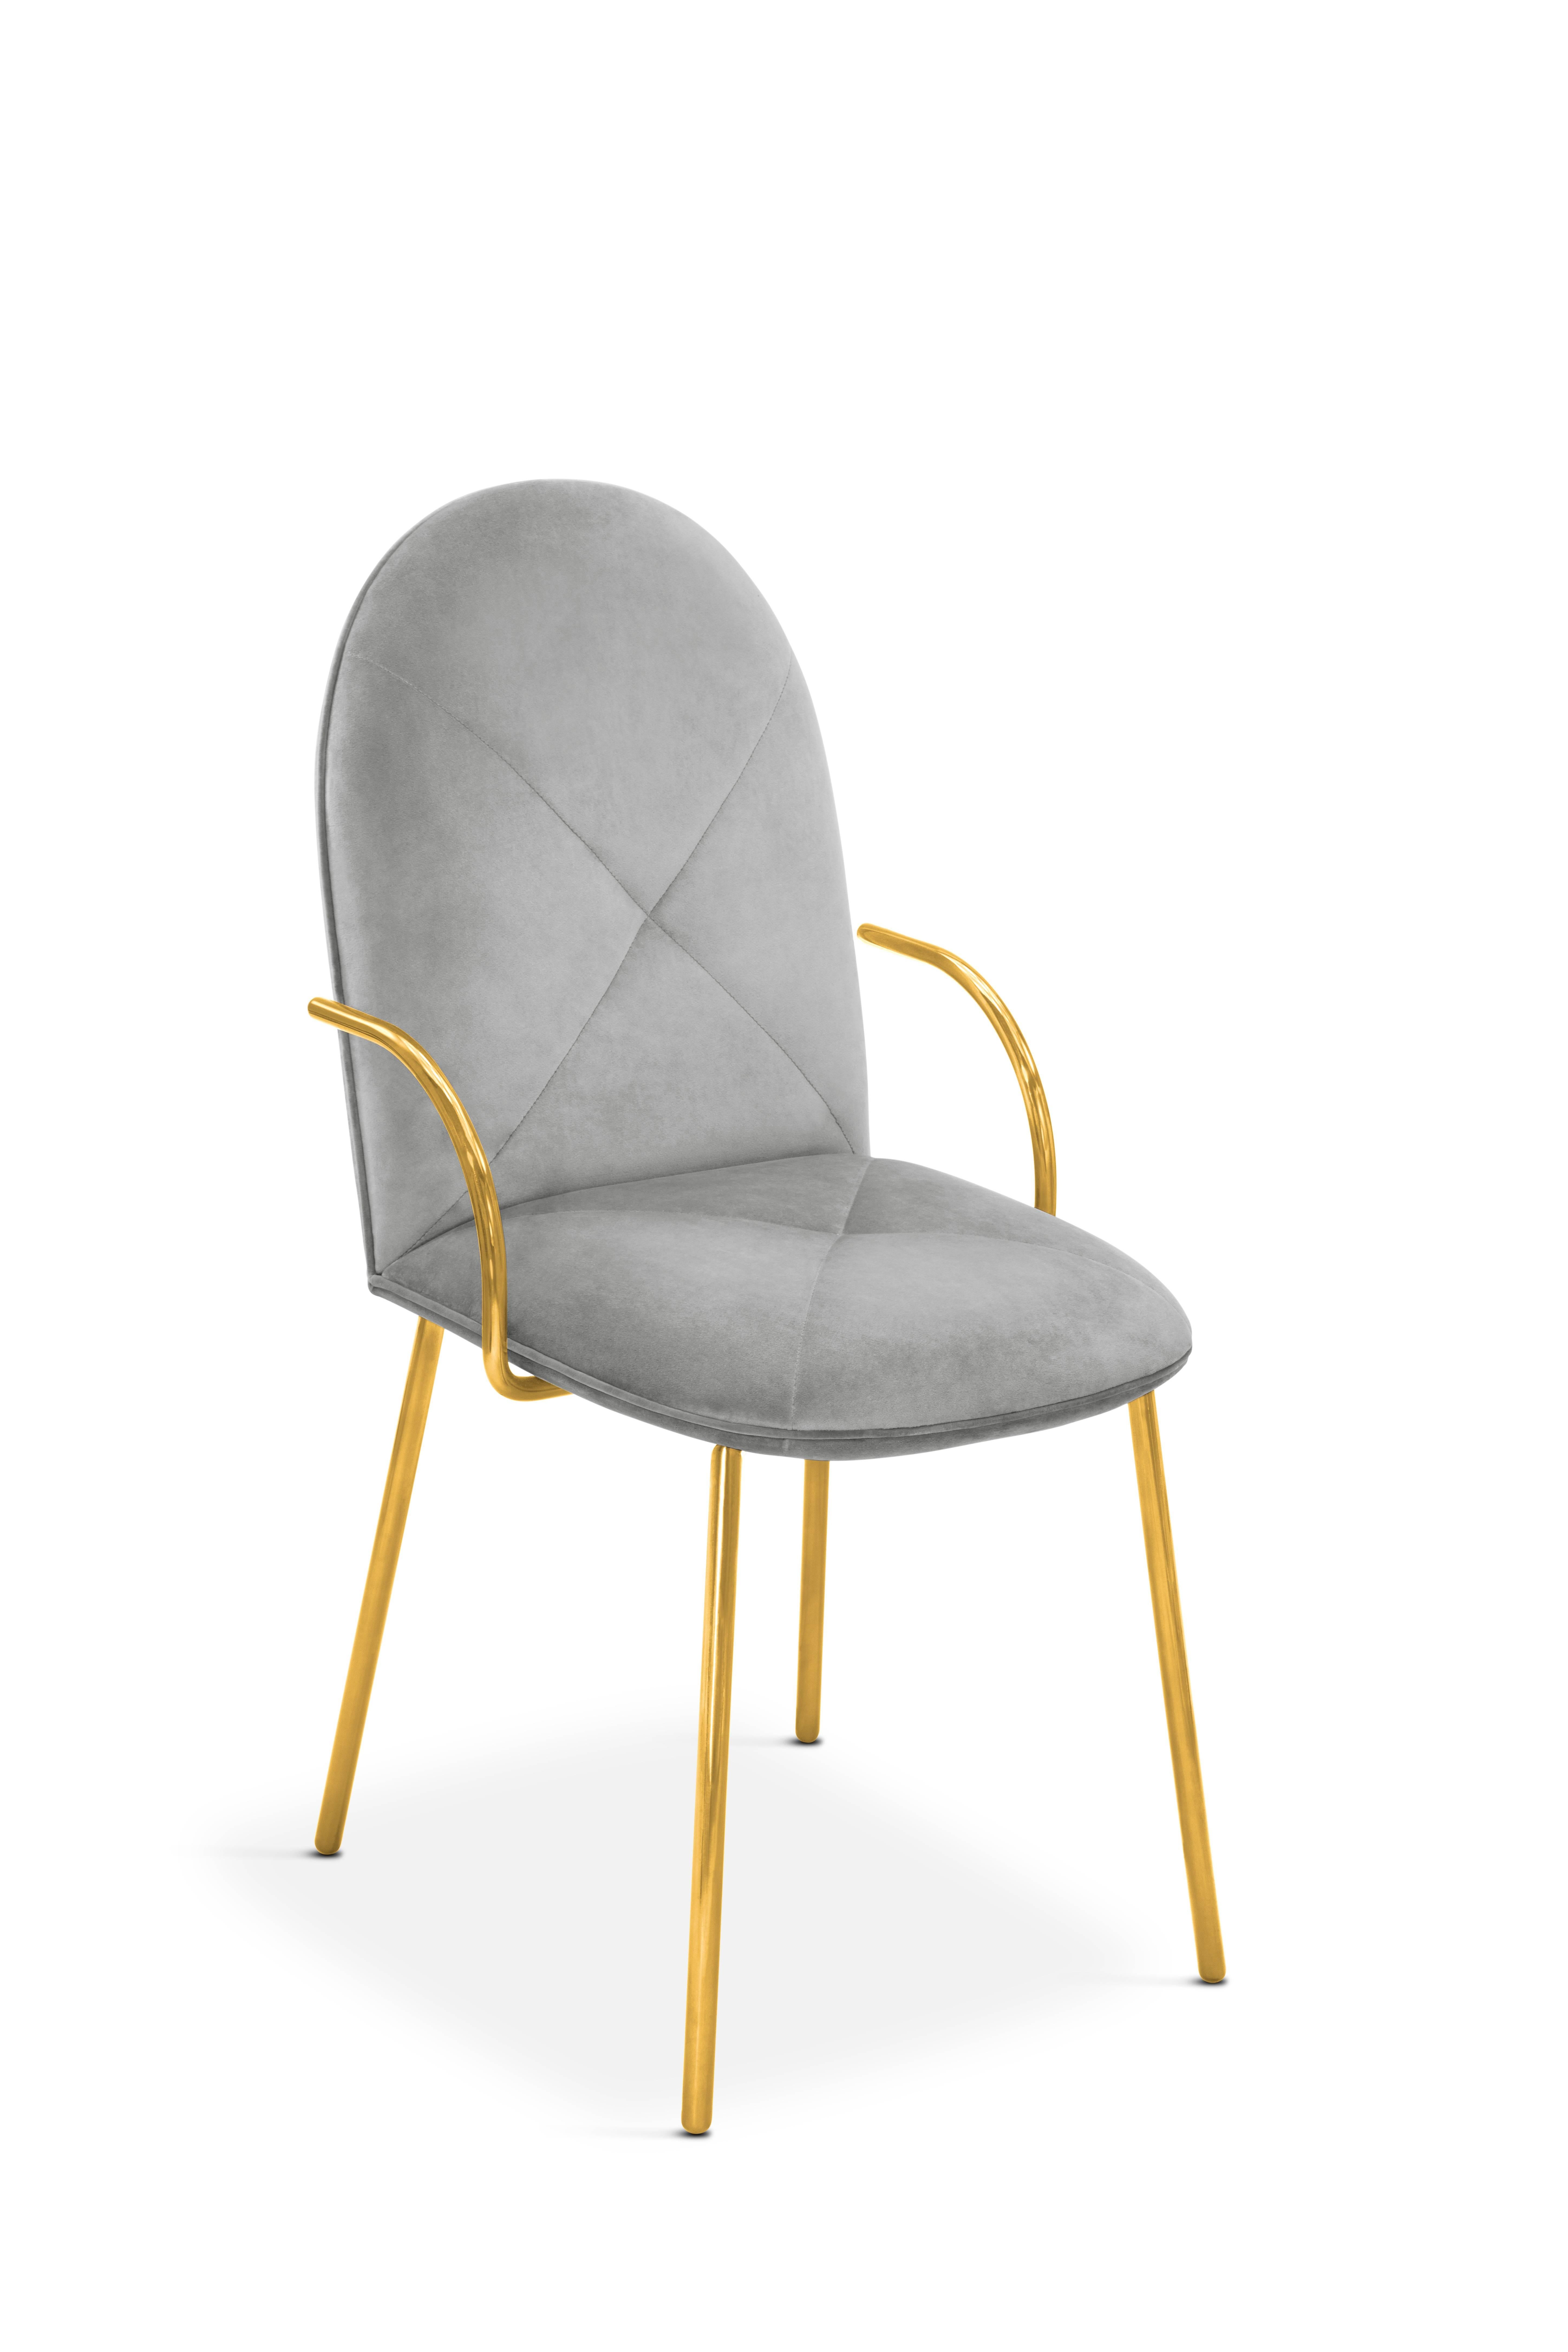 Other Orion Chair Grey by Nika Zupanc for Scarlet Splendour For Sale